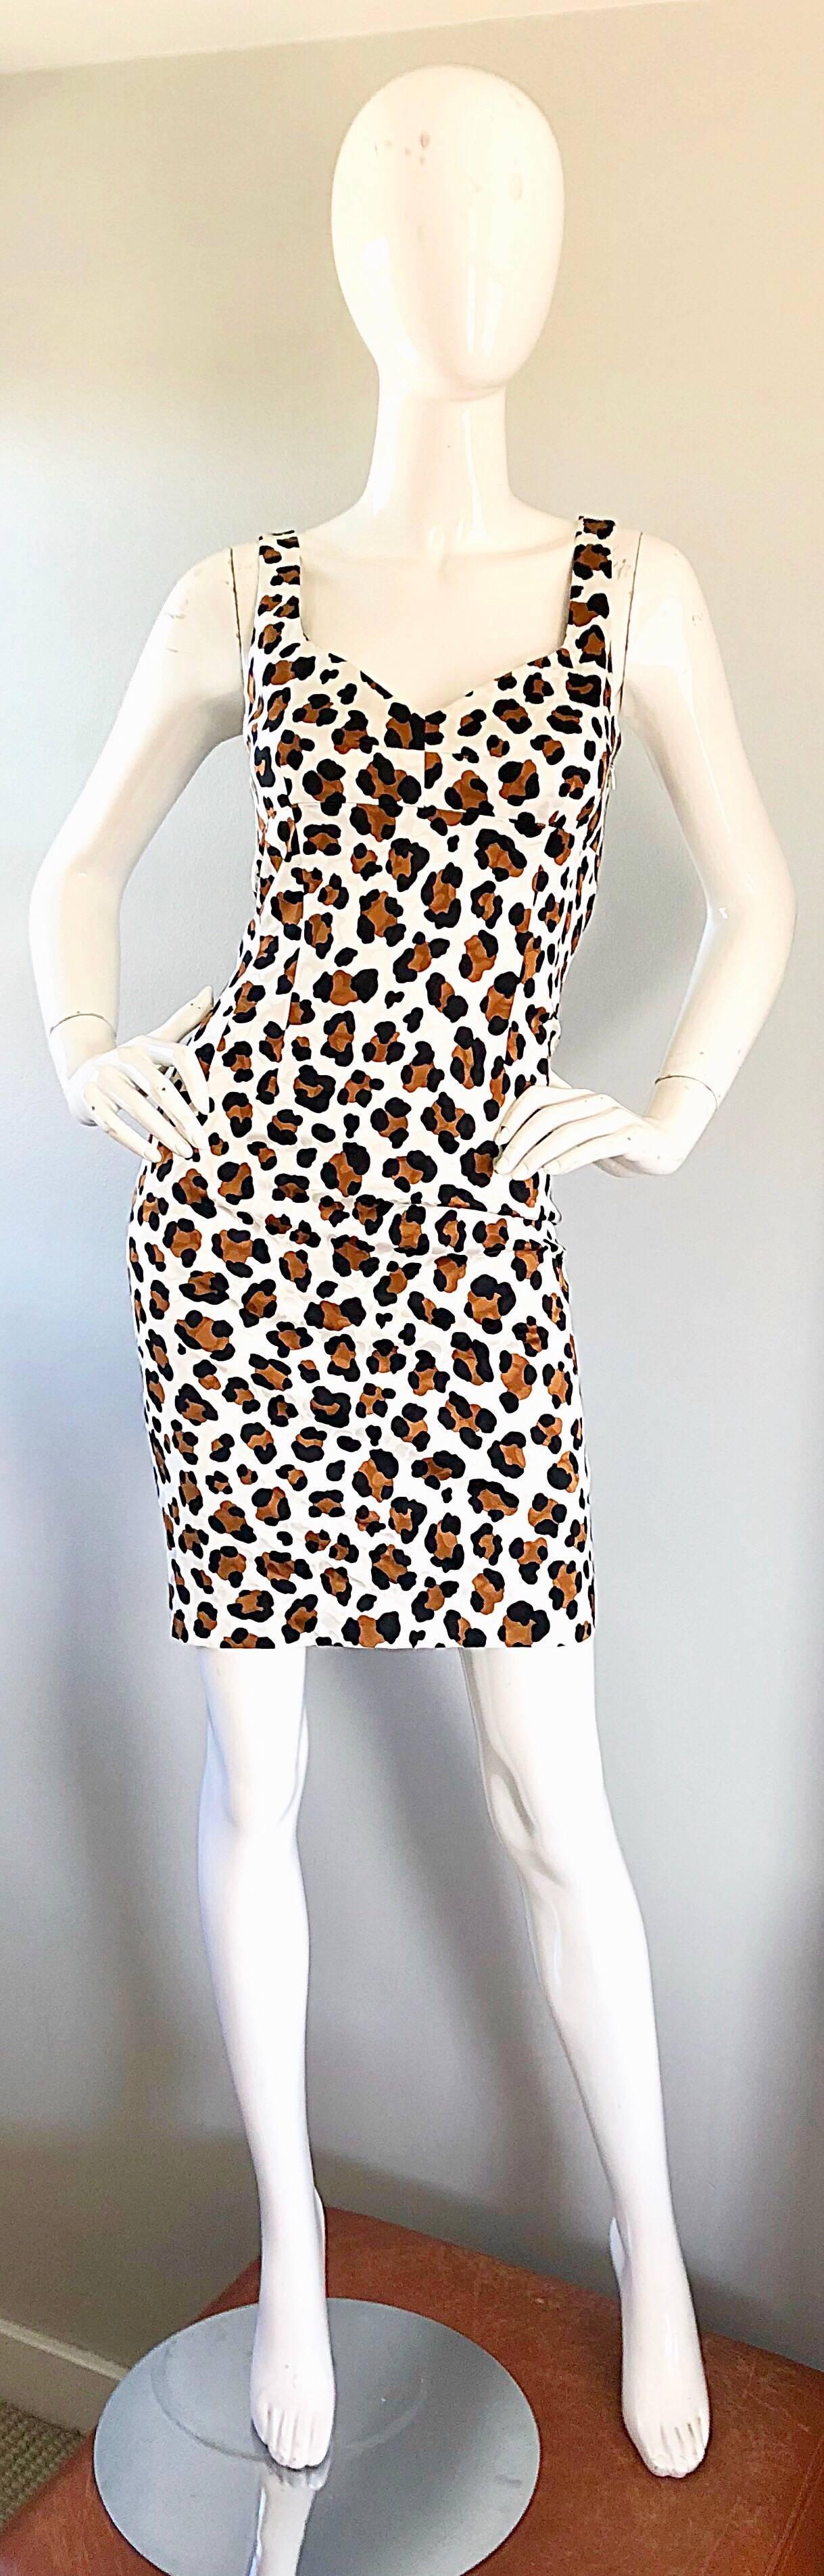 Chic early 2000s MICHAEL KORS COLLECTION white 
cheetah / leopard print sheath dress! Features a fun rust colored and black animal print throughout. Flattering sweetheart neckline. Soft blend of Rayon (65%), Cotton (32%), and Spandex (3%). Body